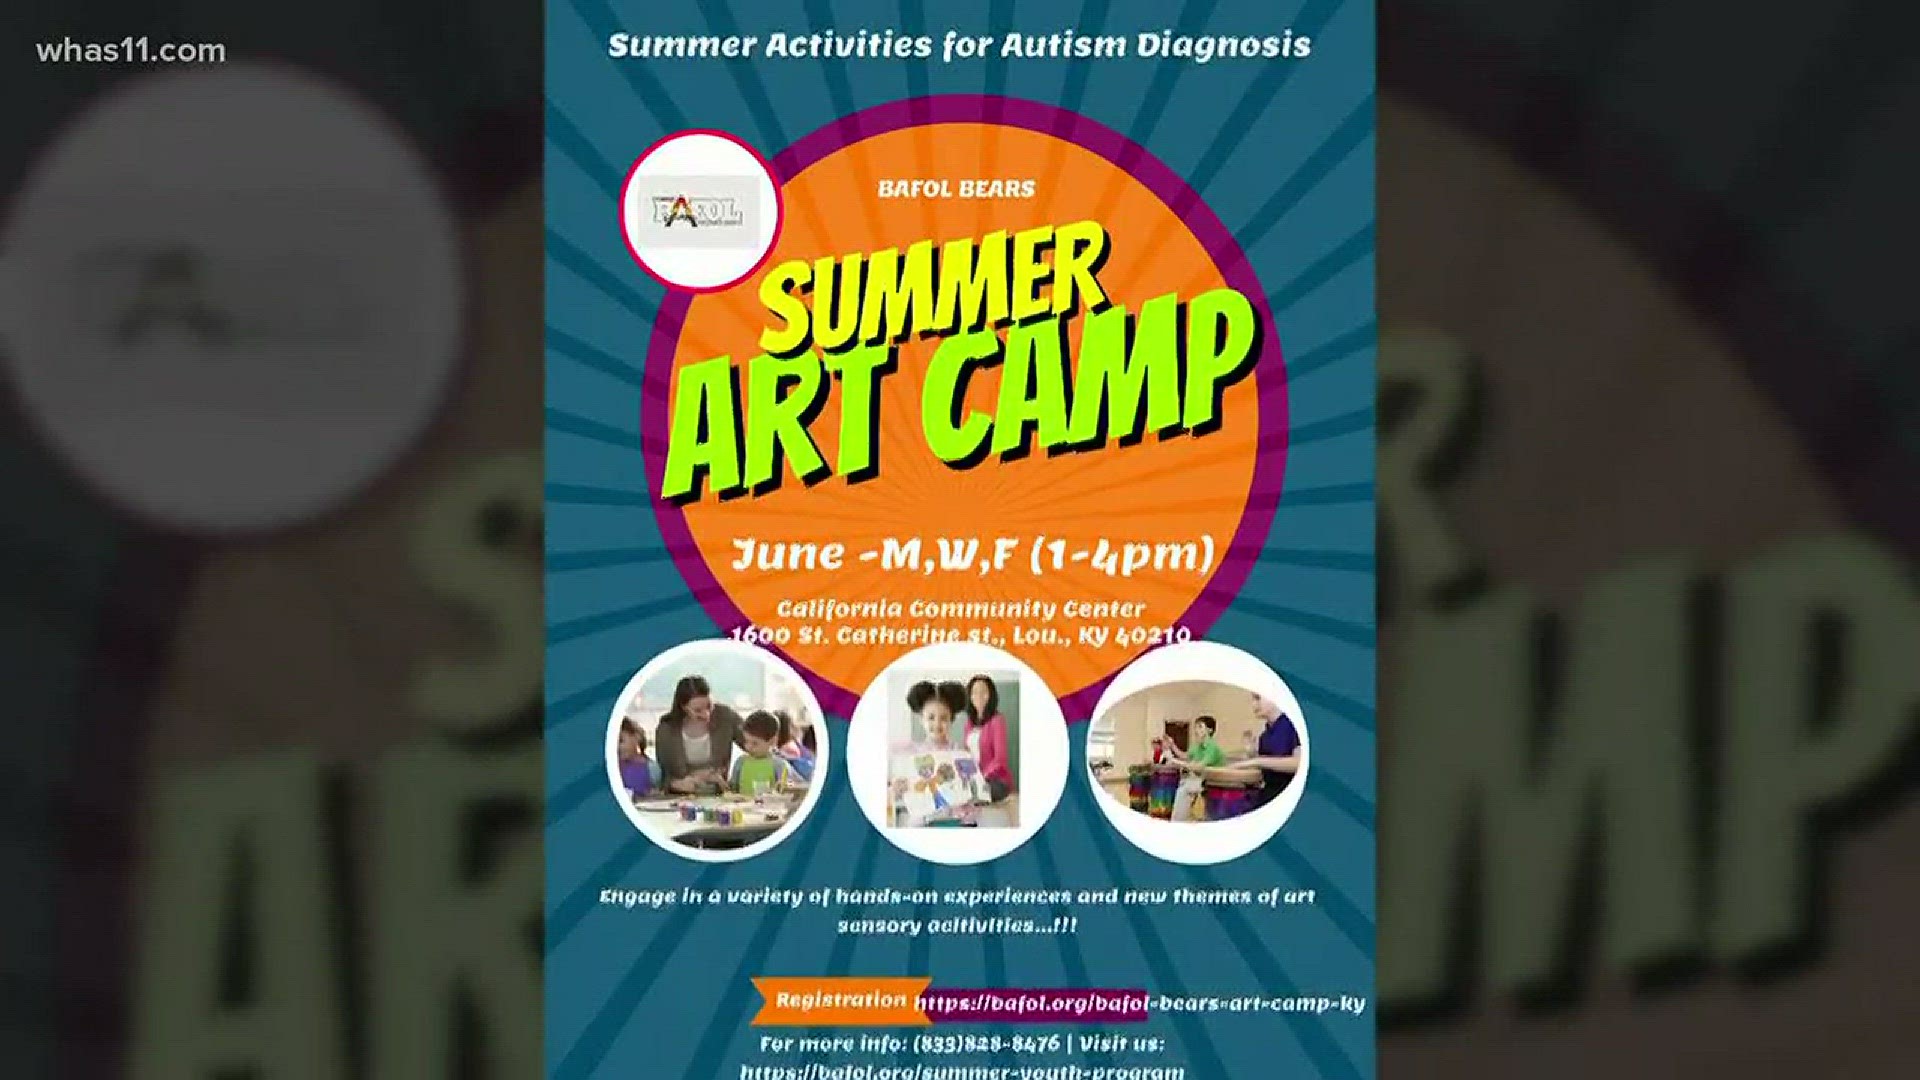 The Booker Autism Foundation is hosting two summer camps for children on the autism spectrum. The CEO of the foundation Reverend Doctor Jasmine Booker talked to WHAS11's Juliana Valencia about the camp.